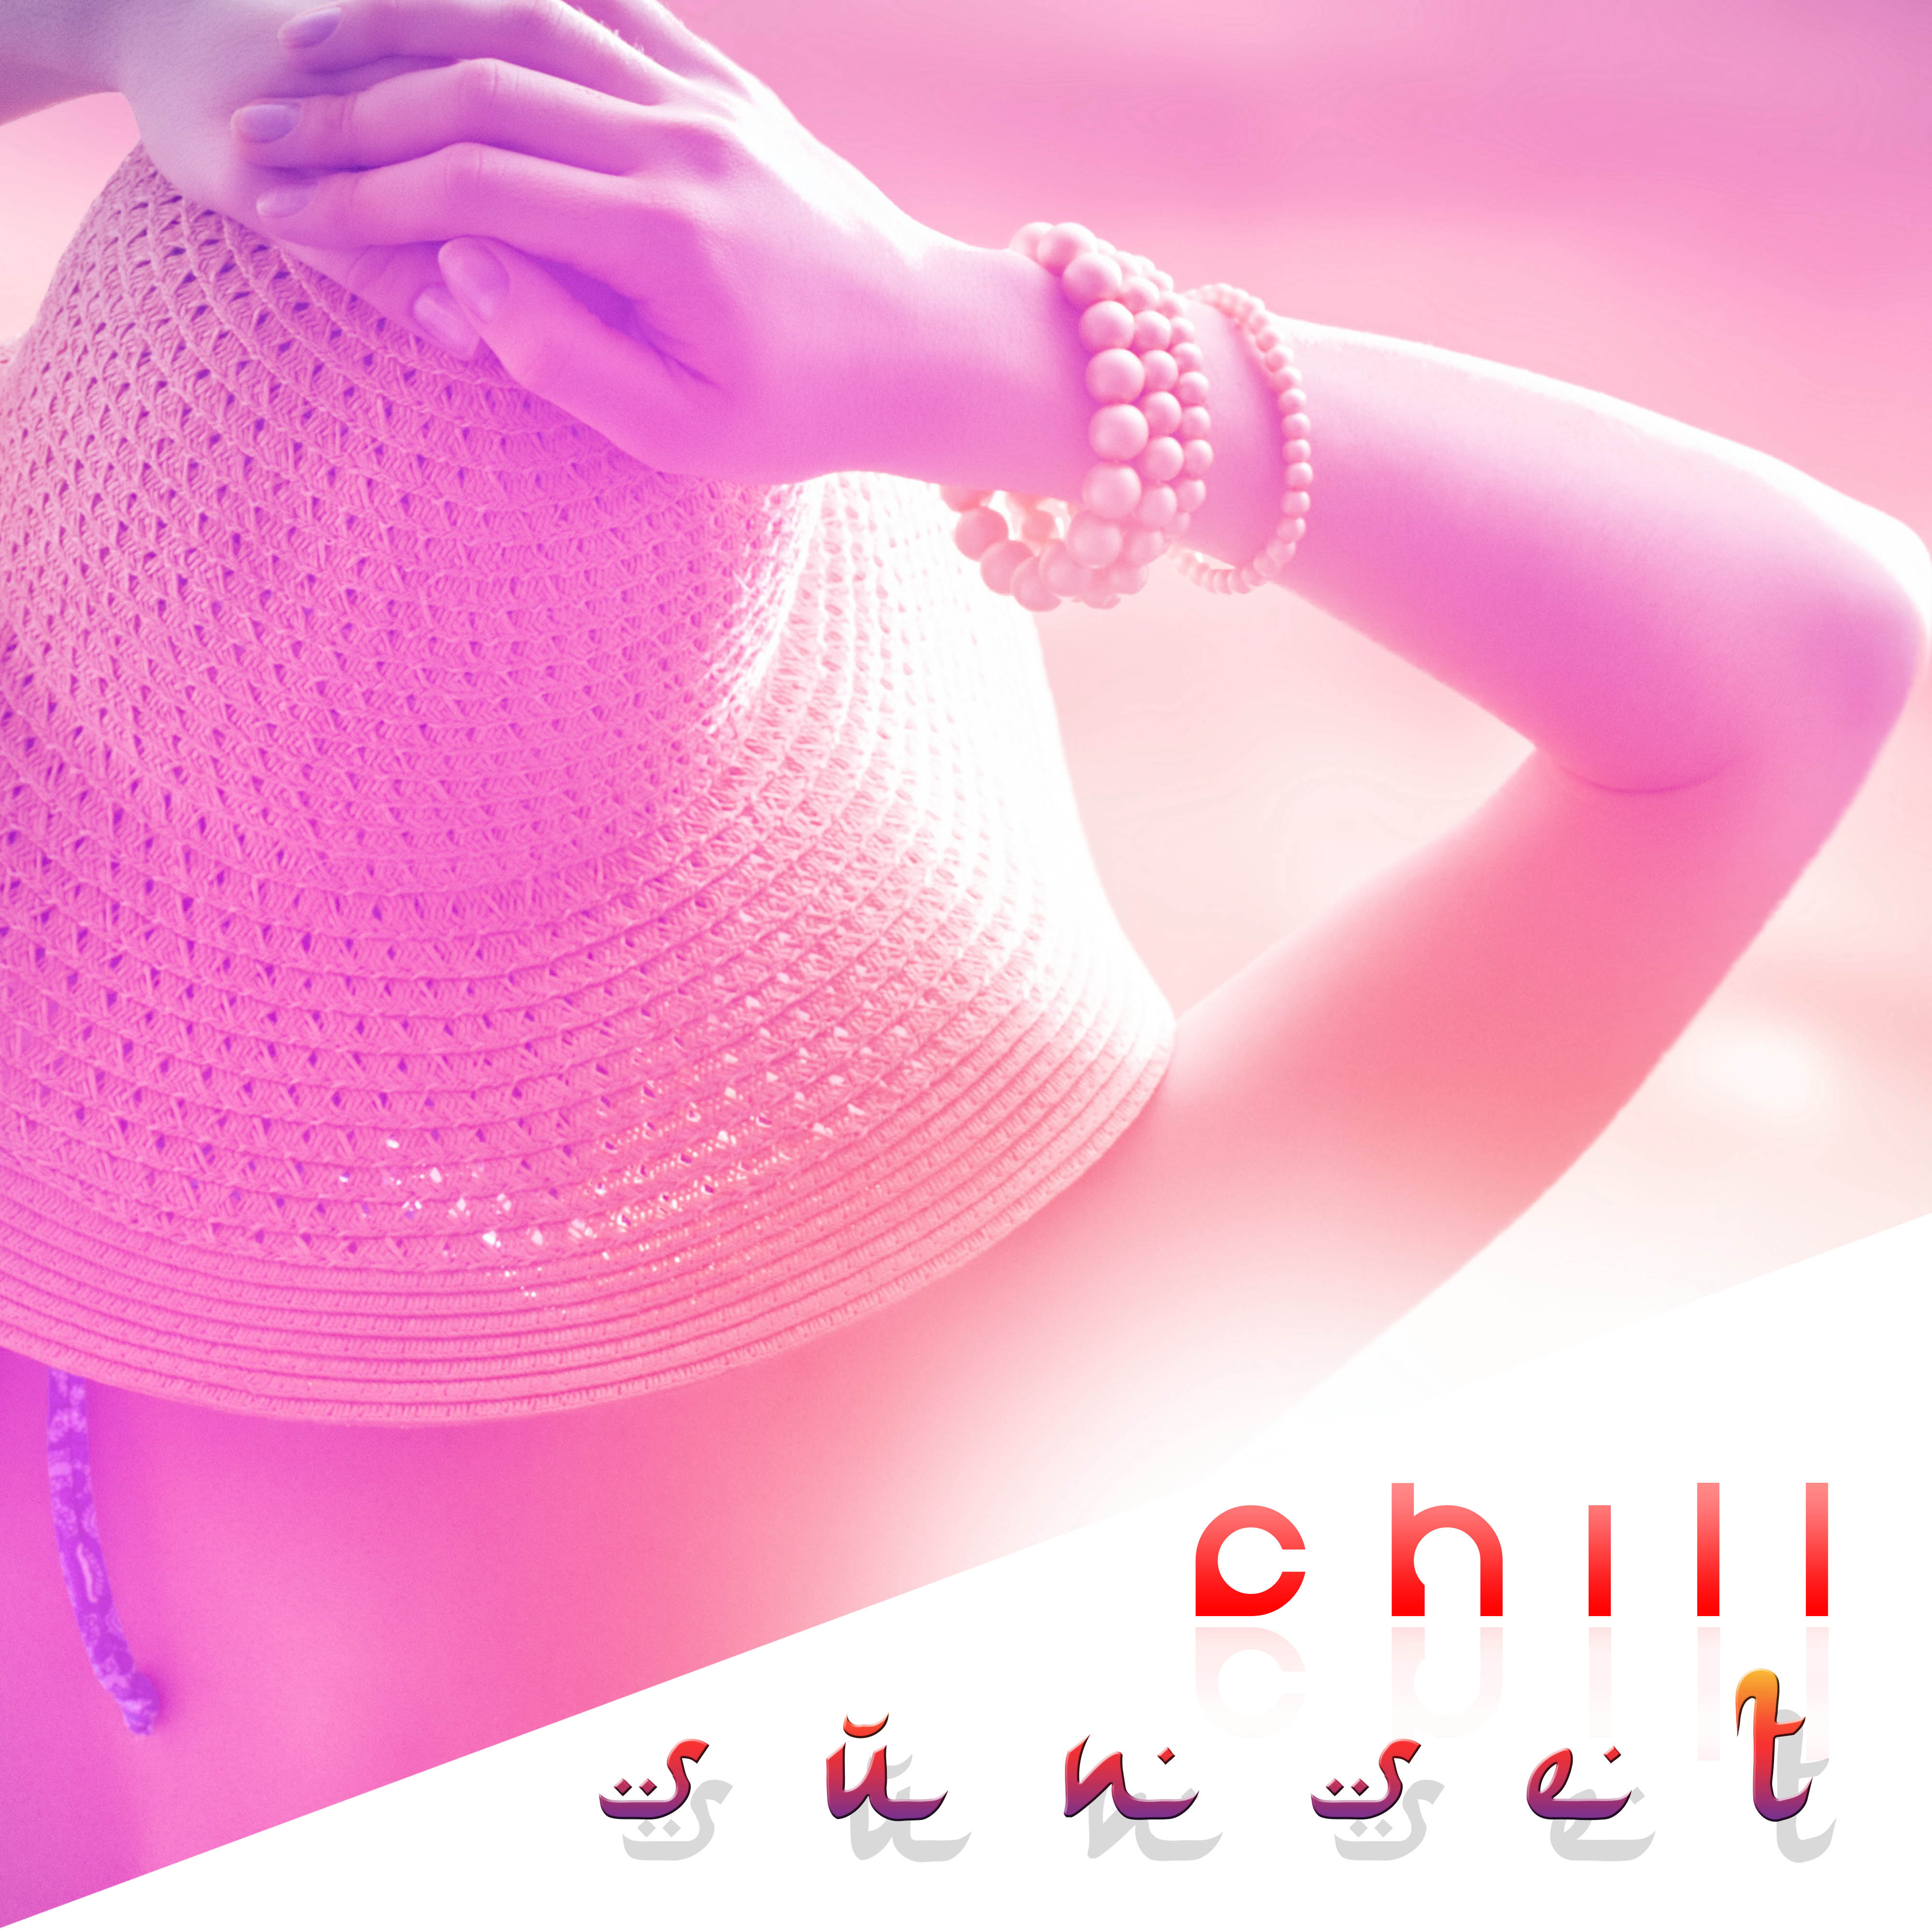 Chill Sunset - Amazing Chill-Out Music for your Senses